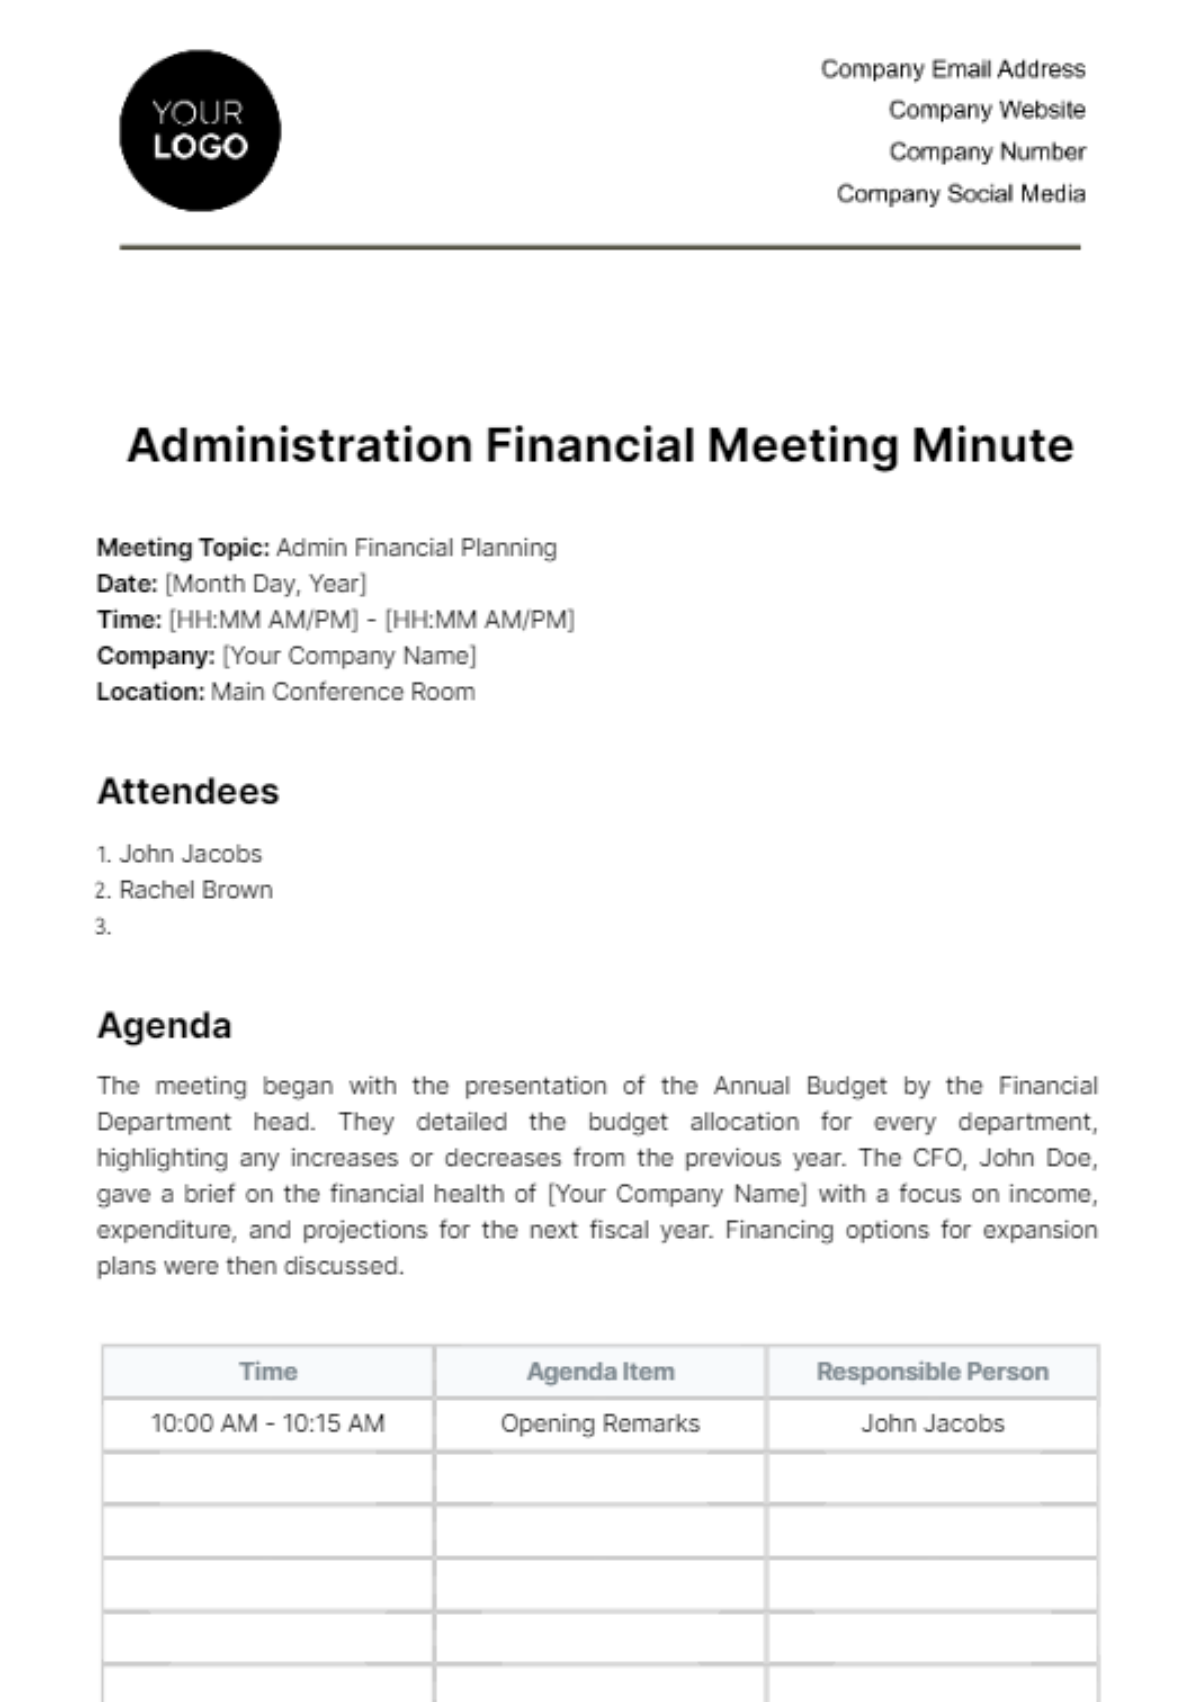 Administration Financial Meeting Minute Template